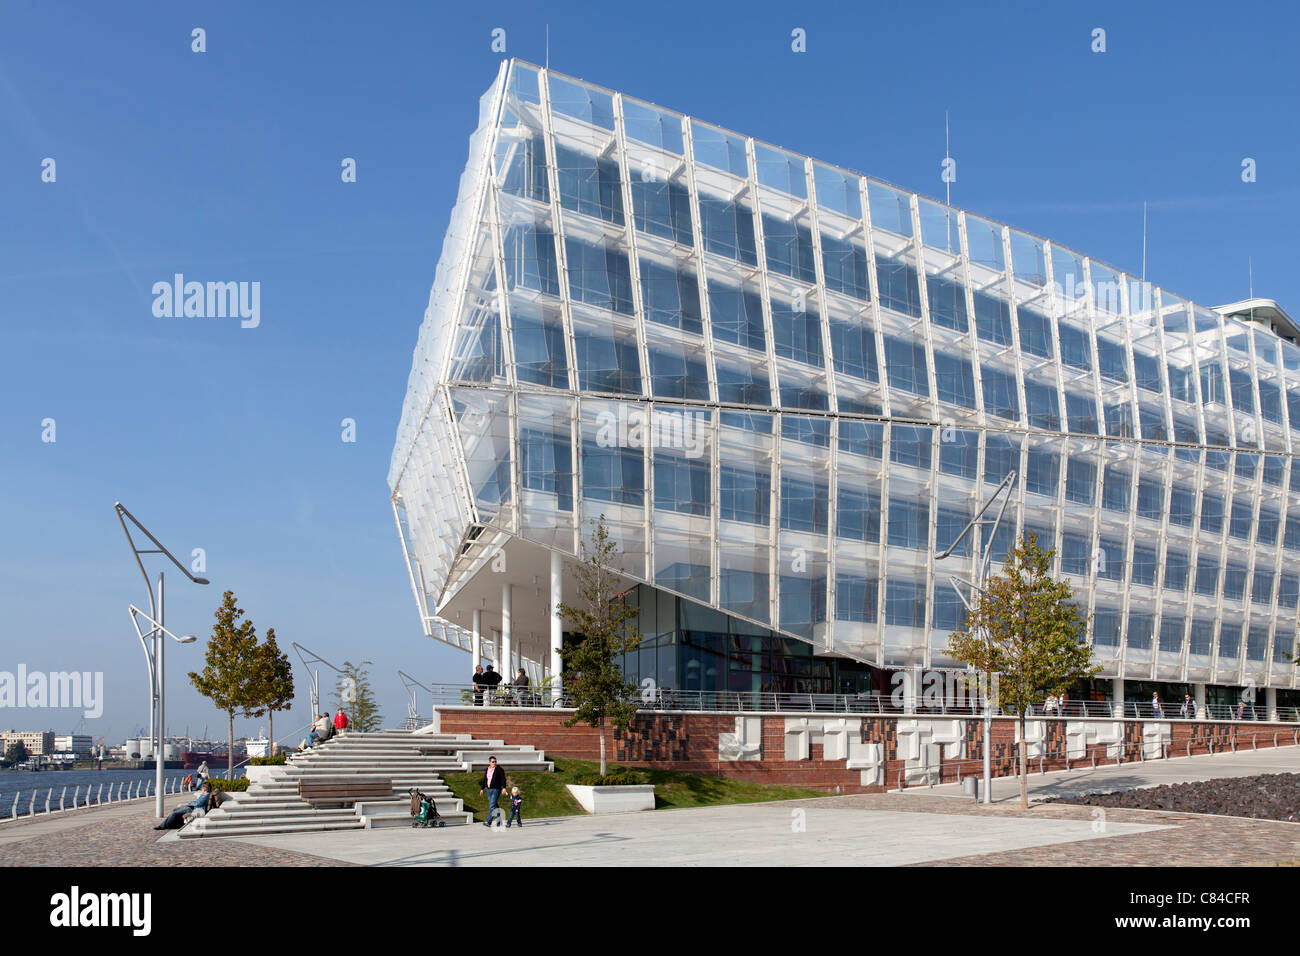 Unilever House, Hafencity (Harbour City) , Hambourg, Allemagne Banque D'Images